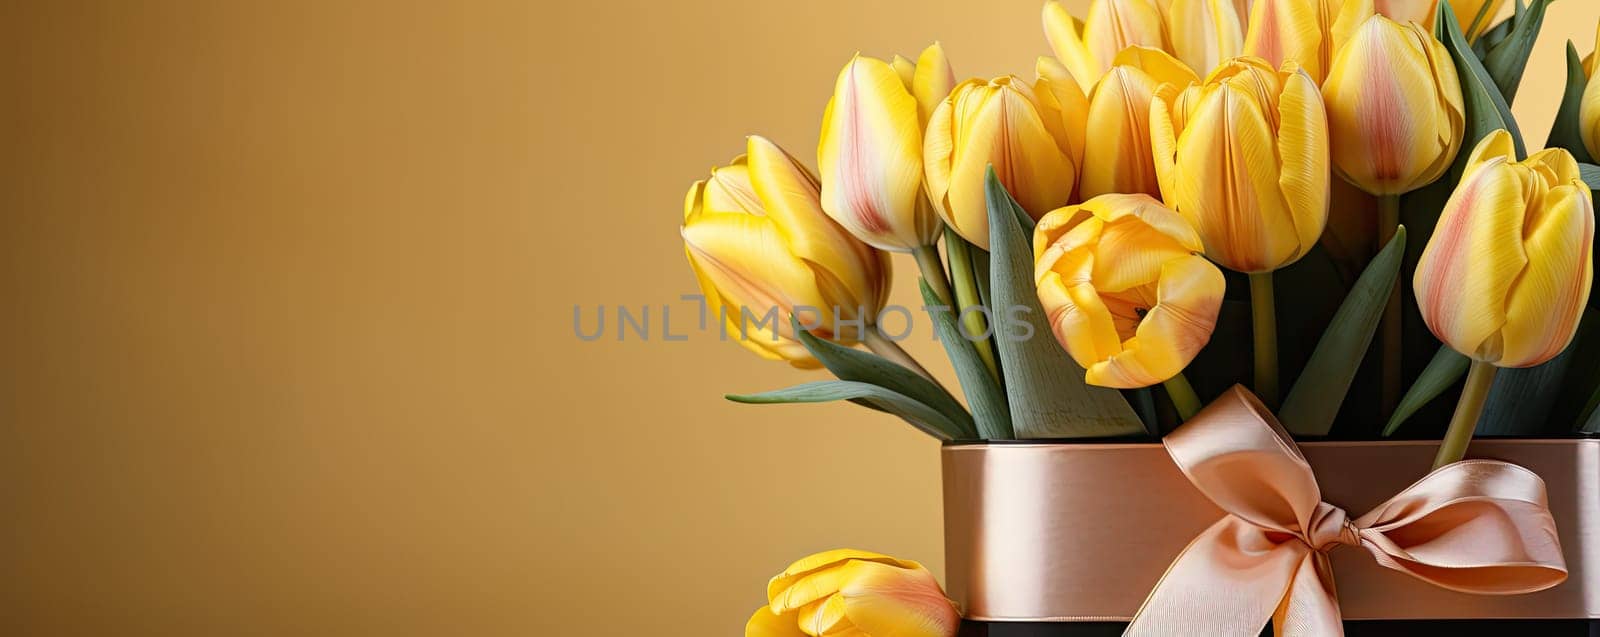 Bright and colorful banner with a bouquet of spring tulips on a cheerful yellow background. Perfect for seasonal greetings and celebrations